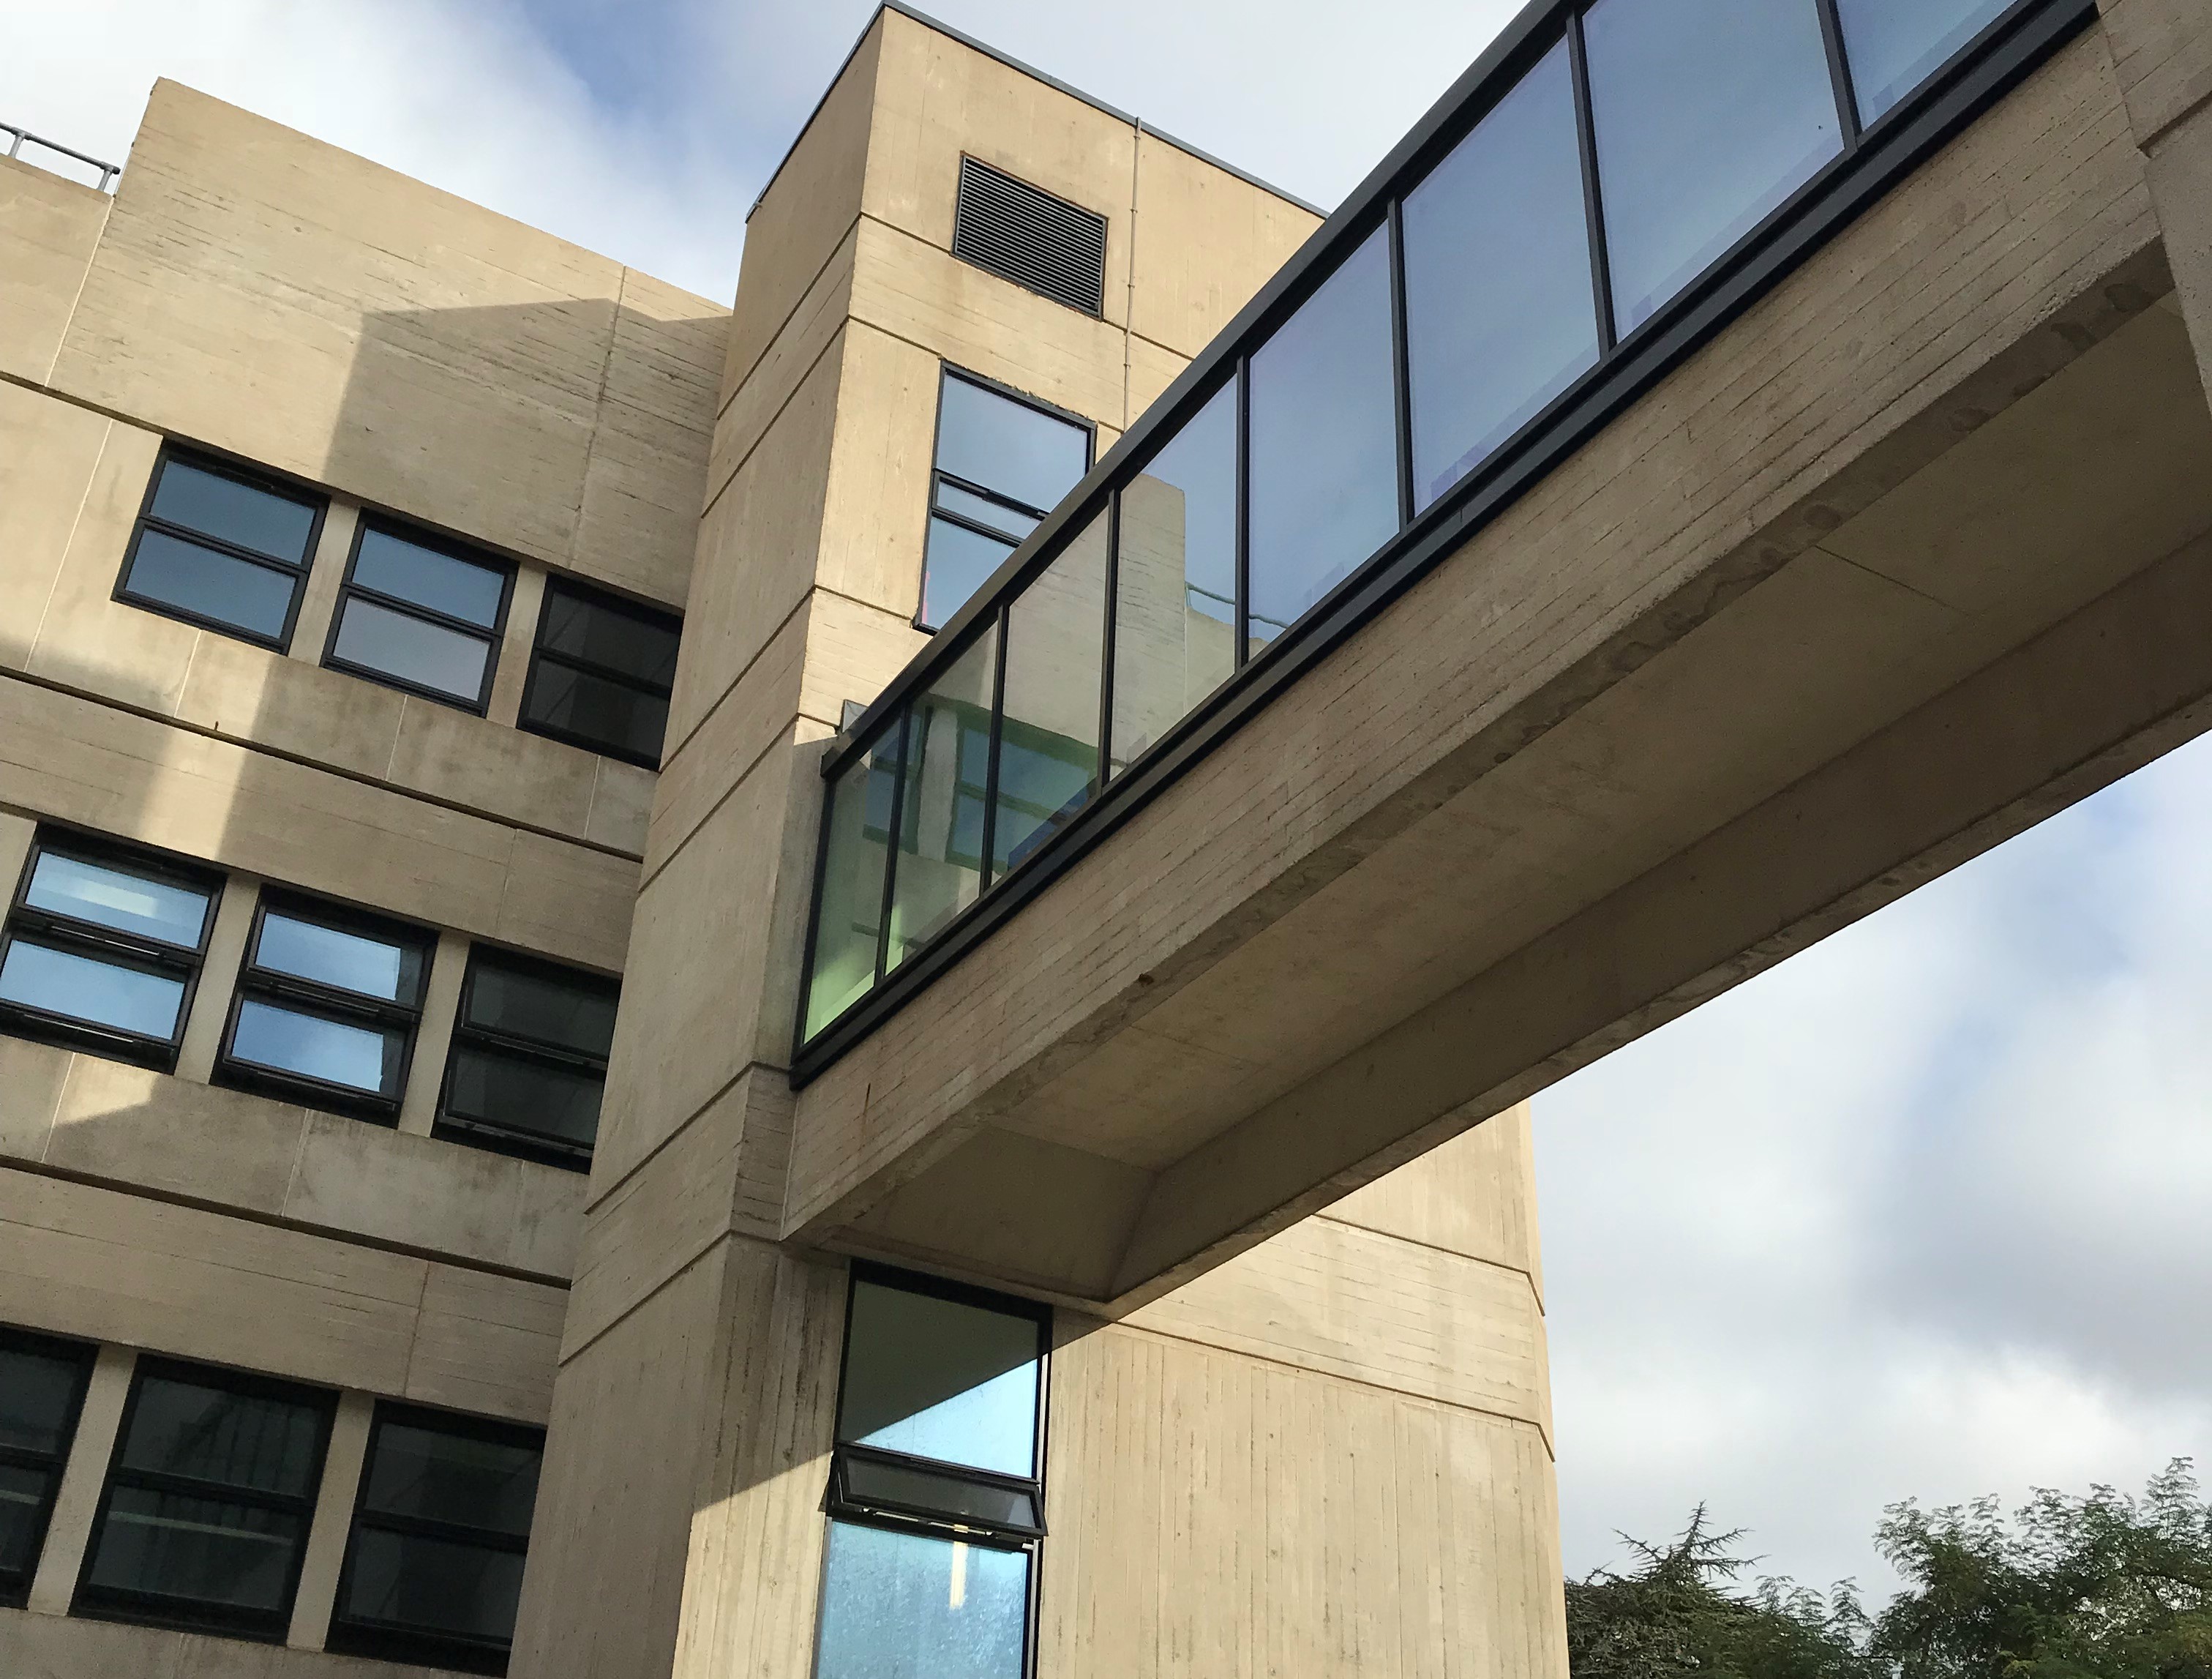 The redevelopment of Oxford University’s largest teaching and research building  